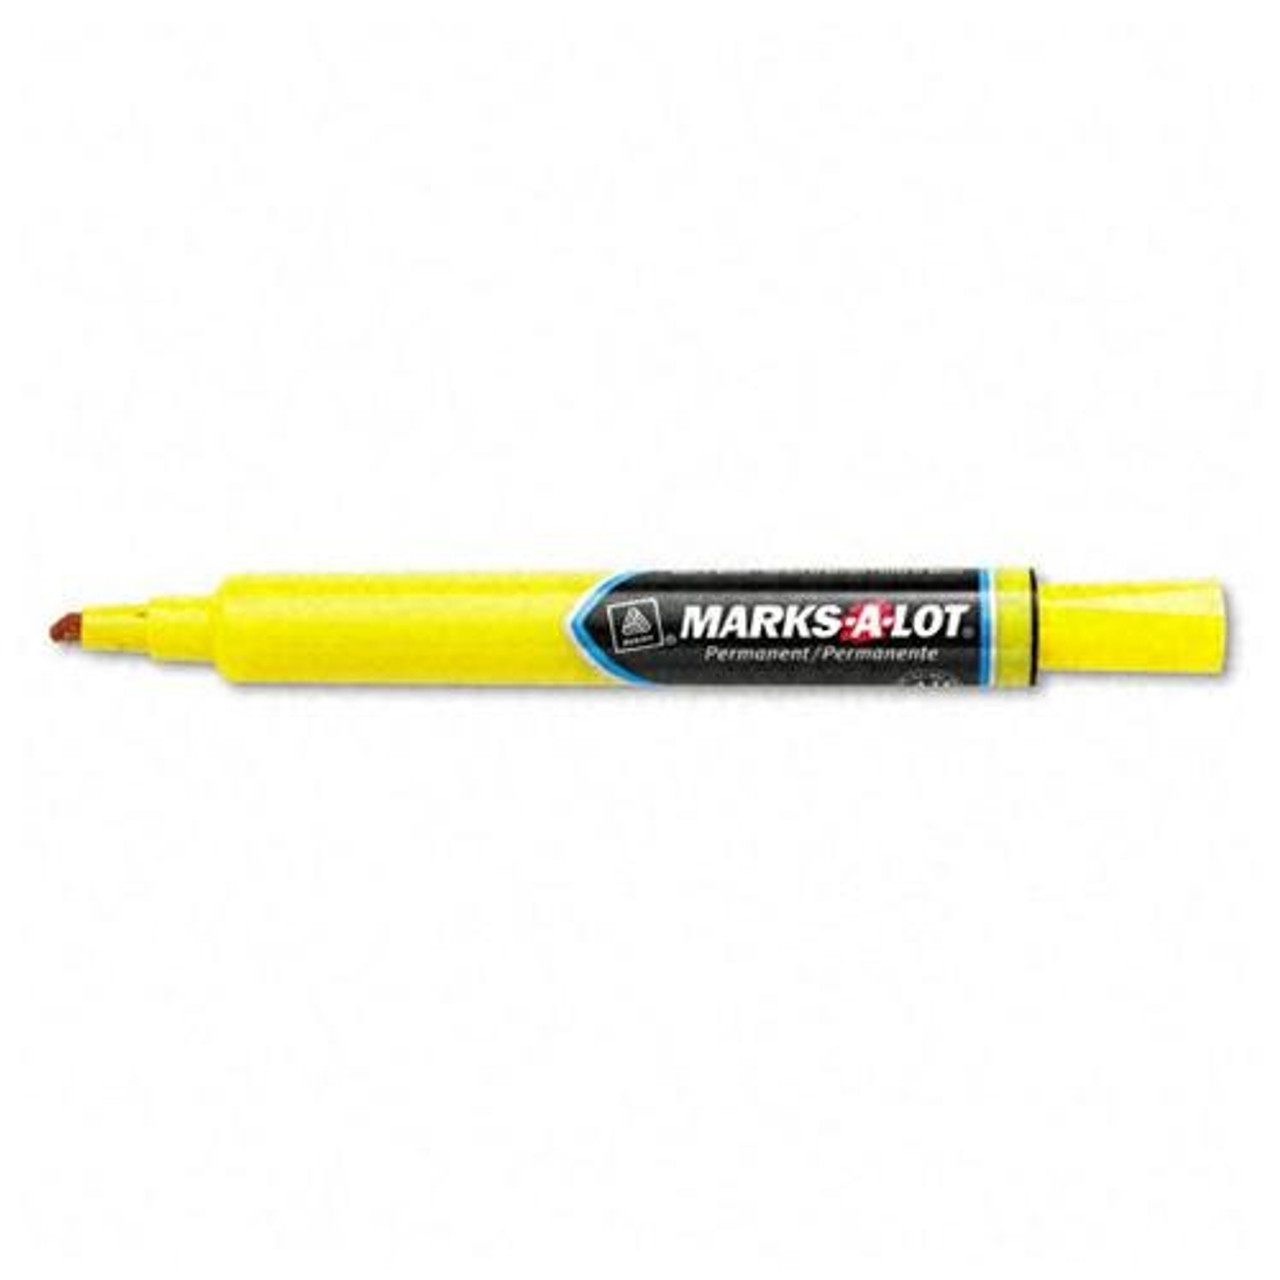 Avery Marks-a-lot Large Permanent Marker - Chisel Marker Point Style -  Yellow Ink - 1 Dozen (08882)